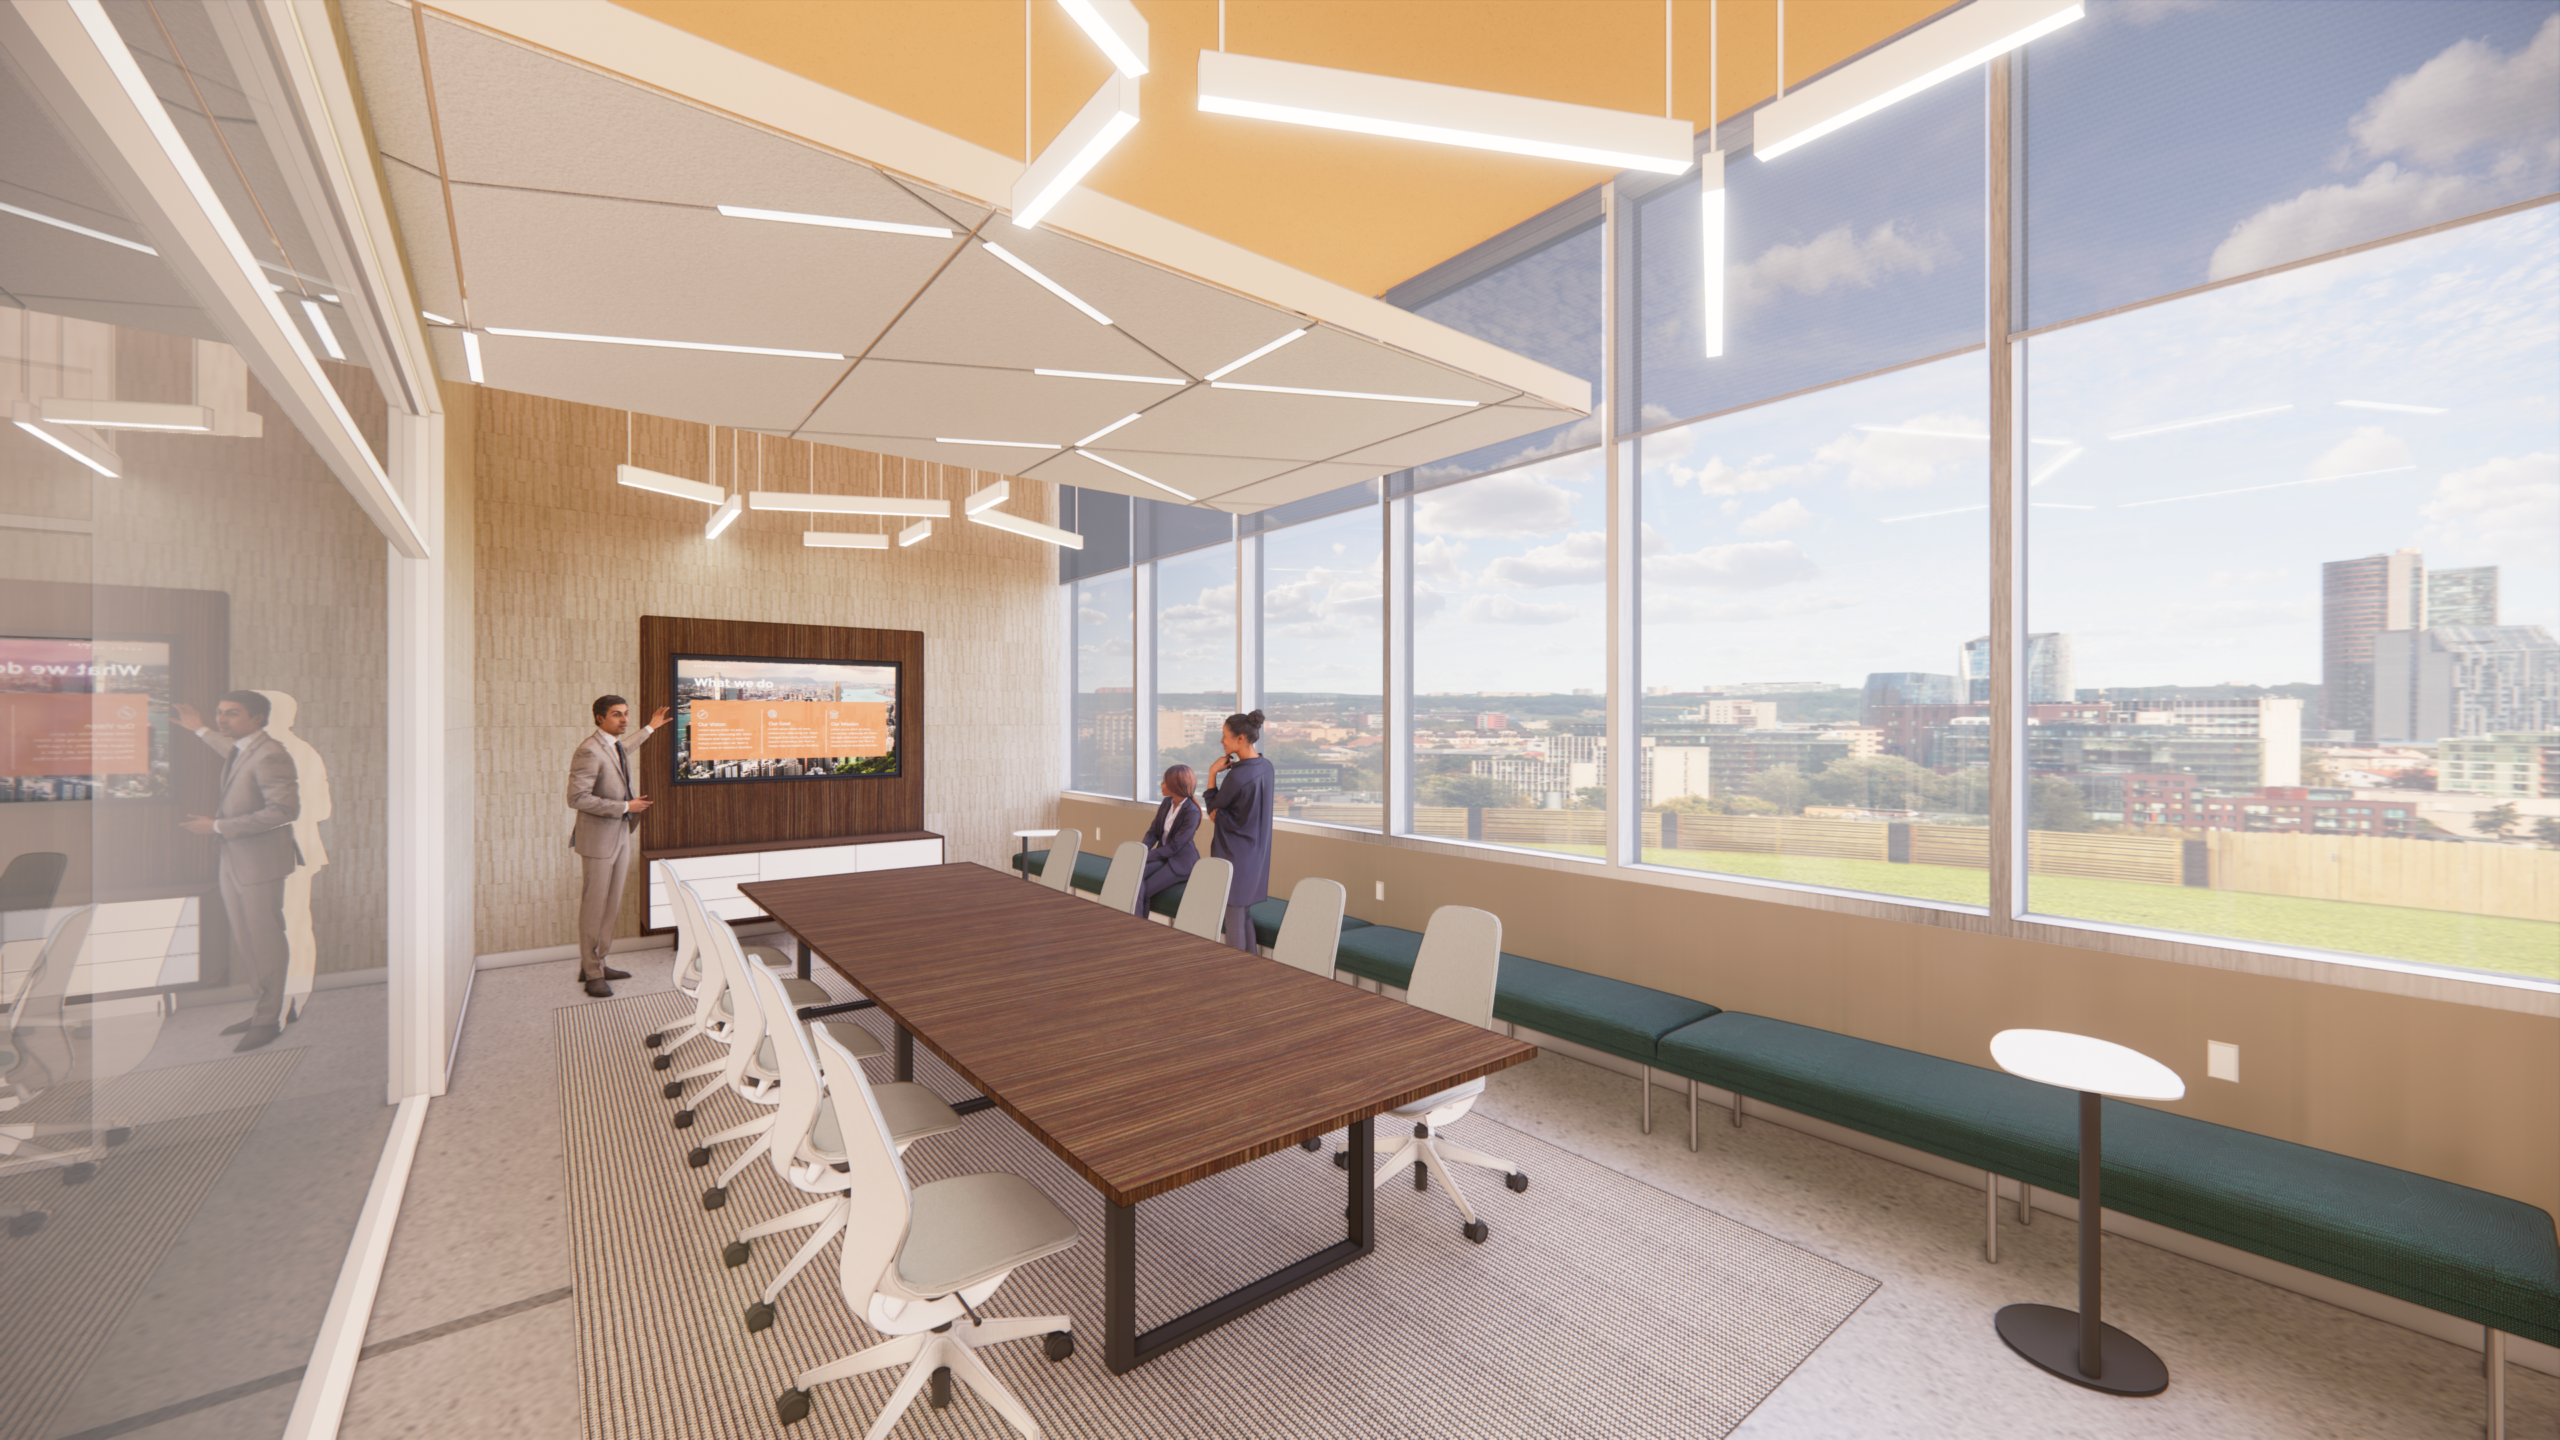 Slideshow: Wexford Science + Technology plans new innovation labs at 850 PBC